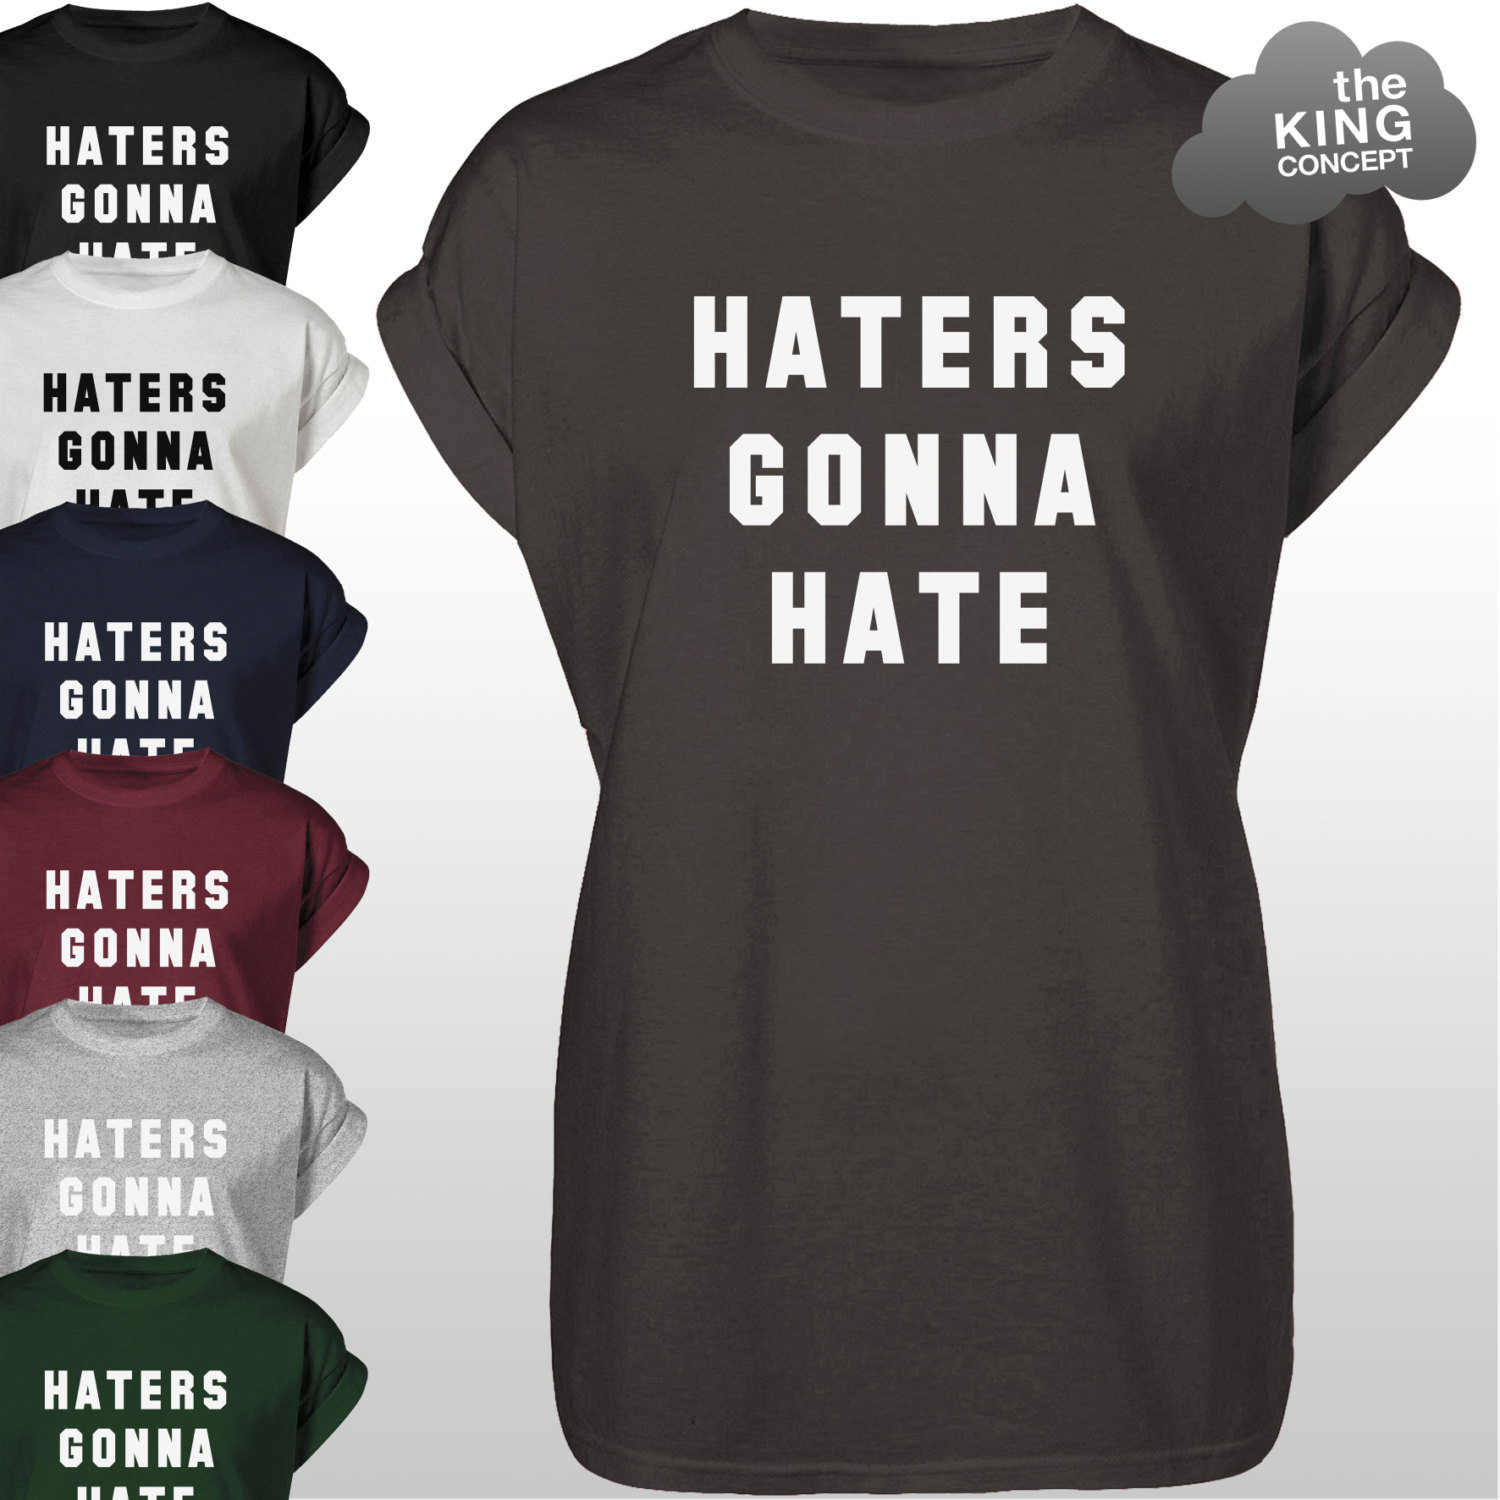 Haters Gonna Hate T-shirt Top Hater's Gone Unisex Adults 